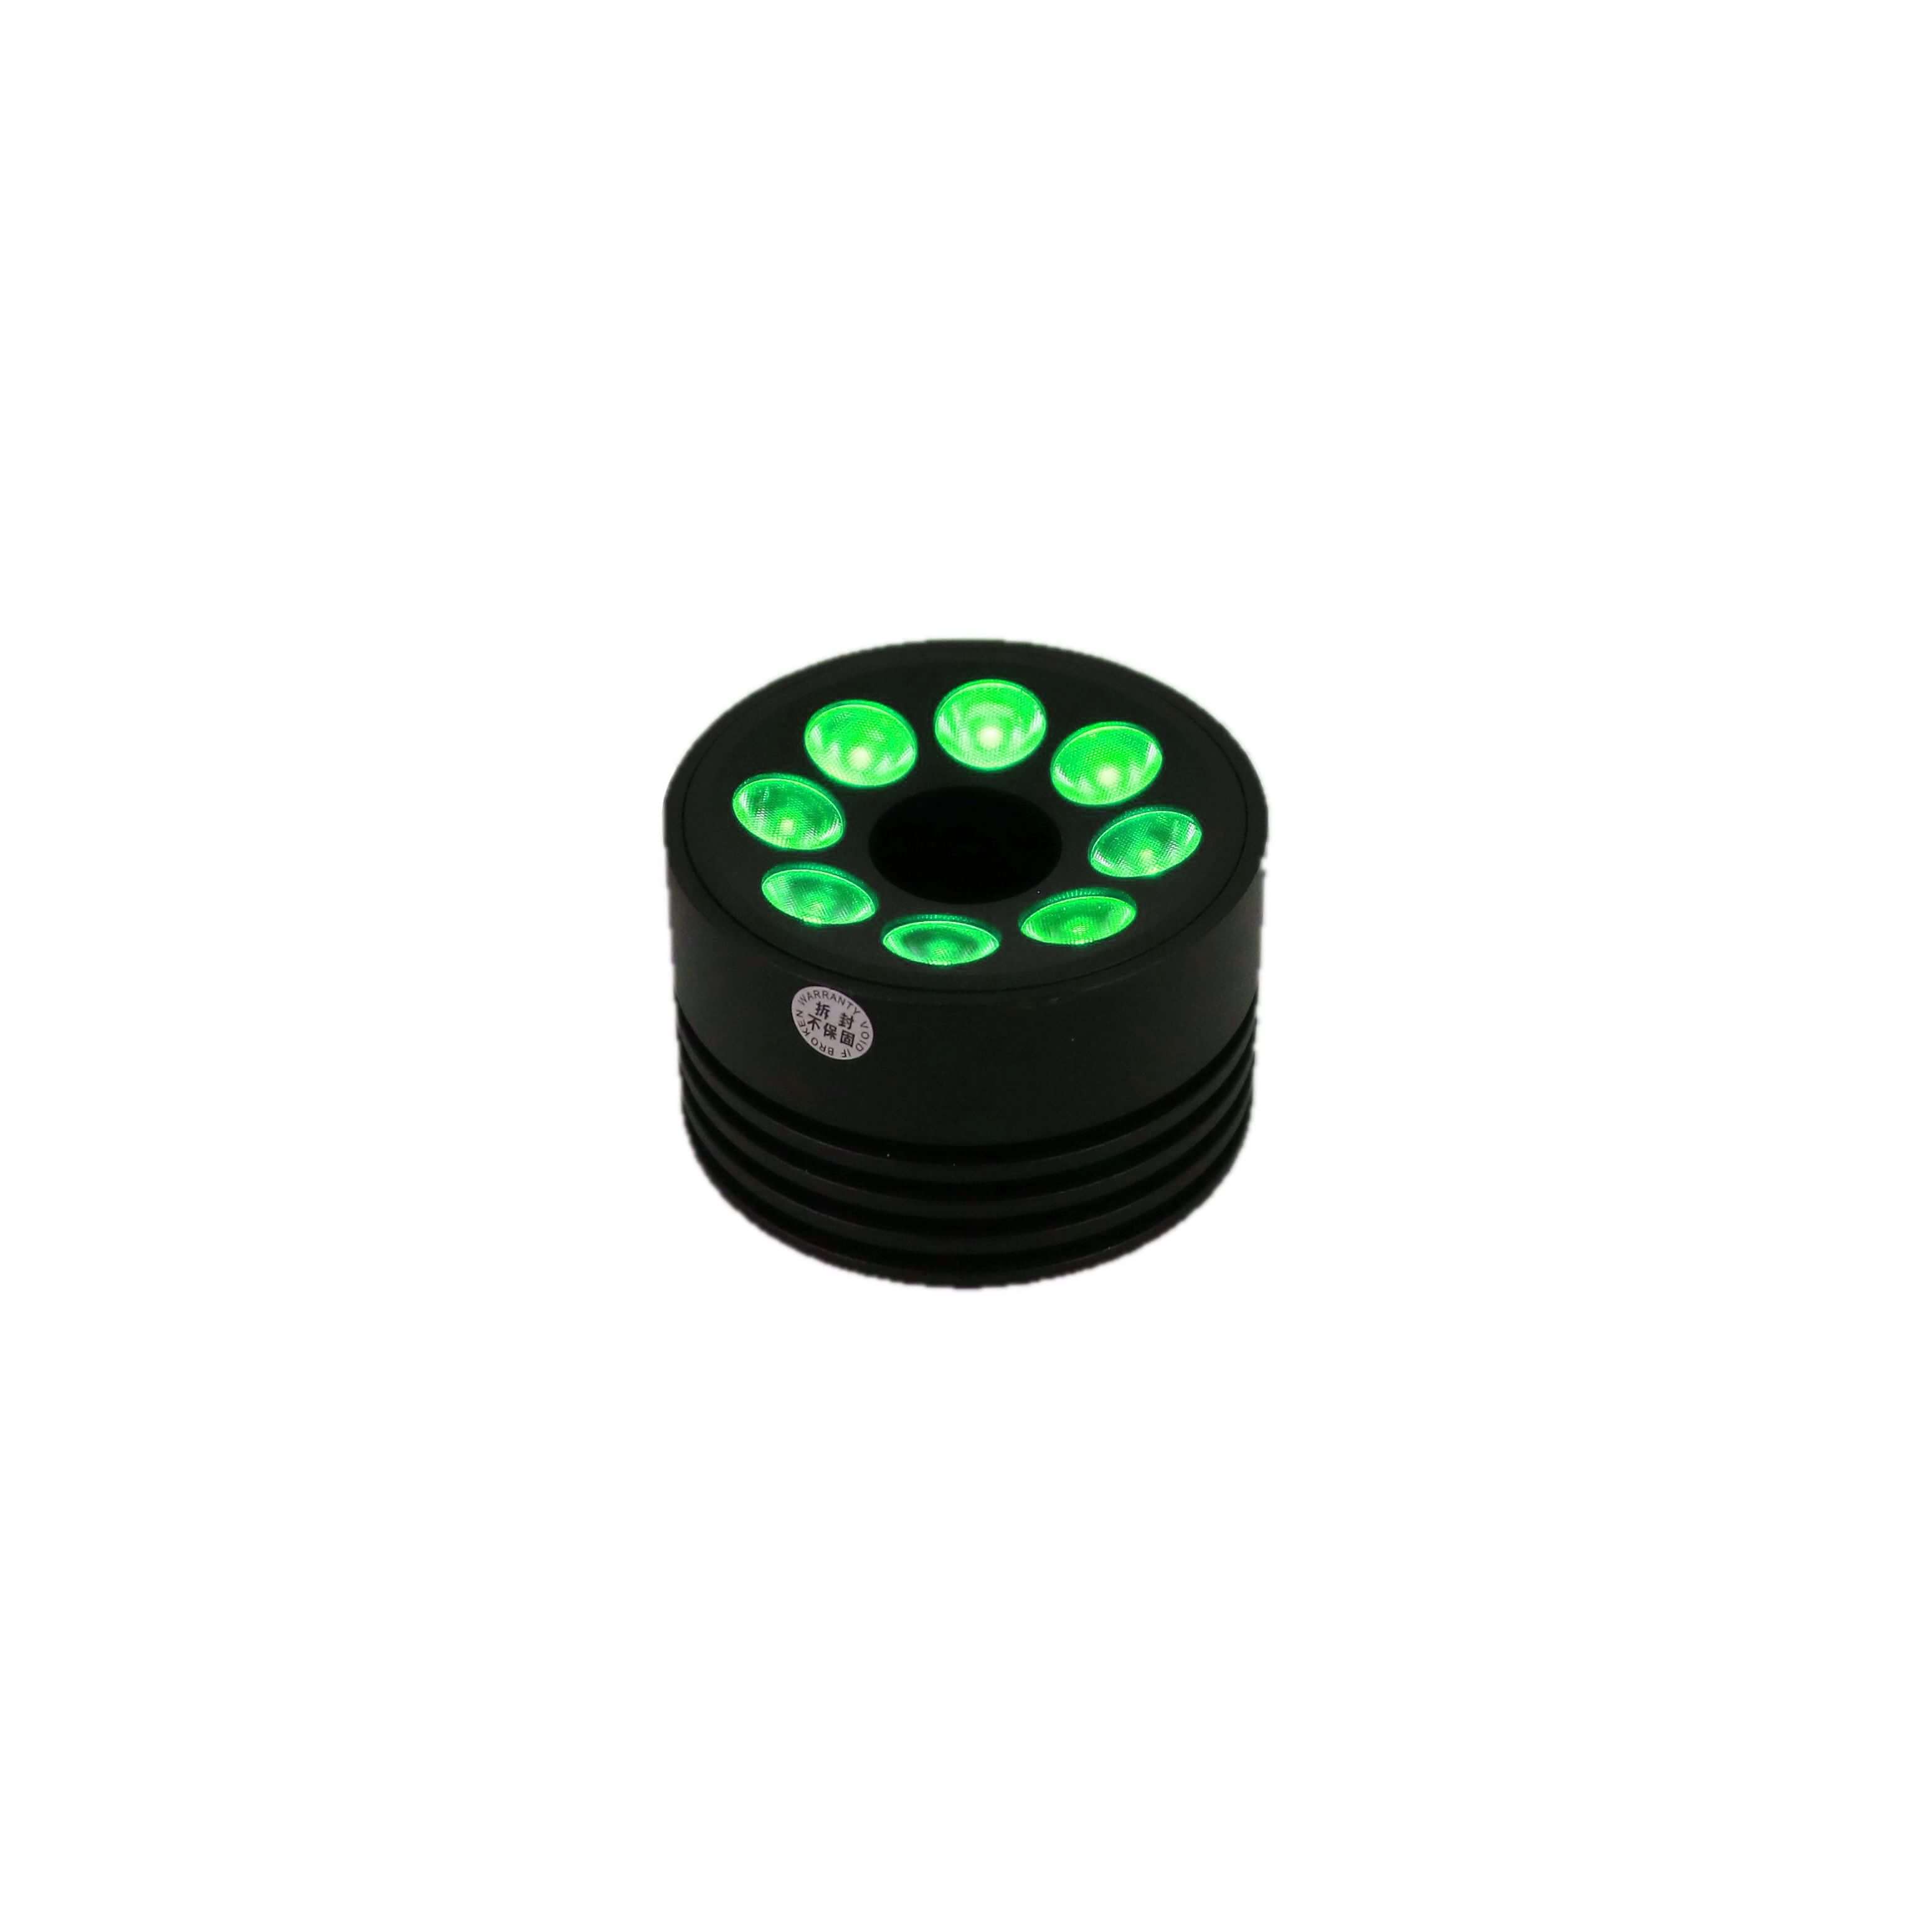 DRC-56/18 Direct Ring Series with High Power Illumination – Green